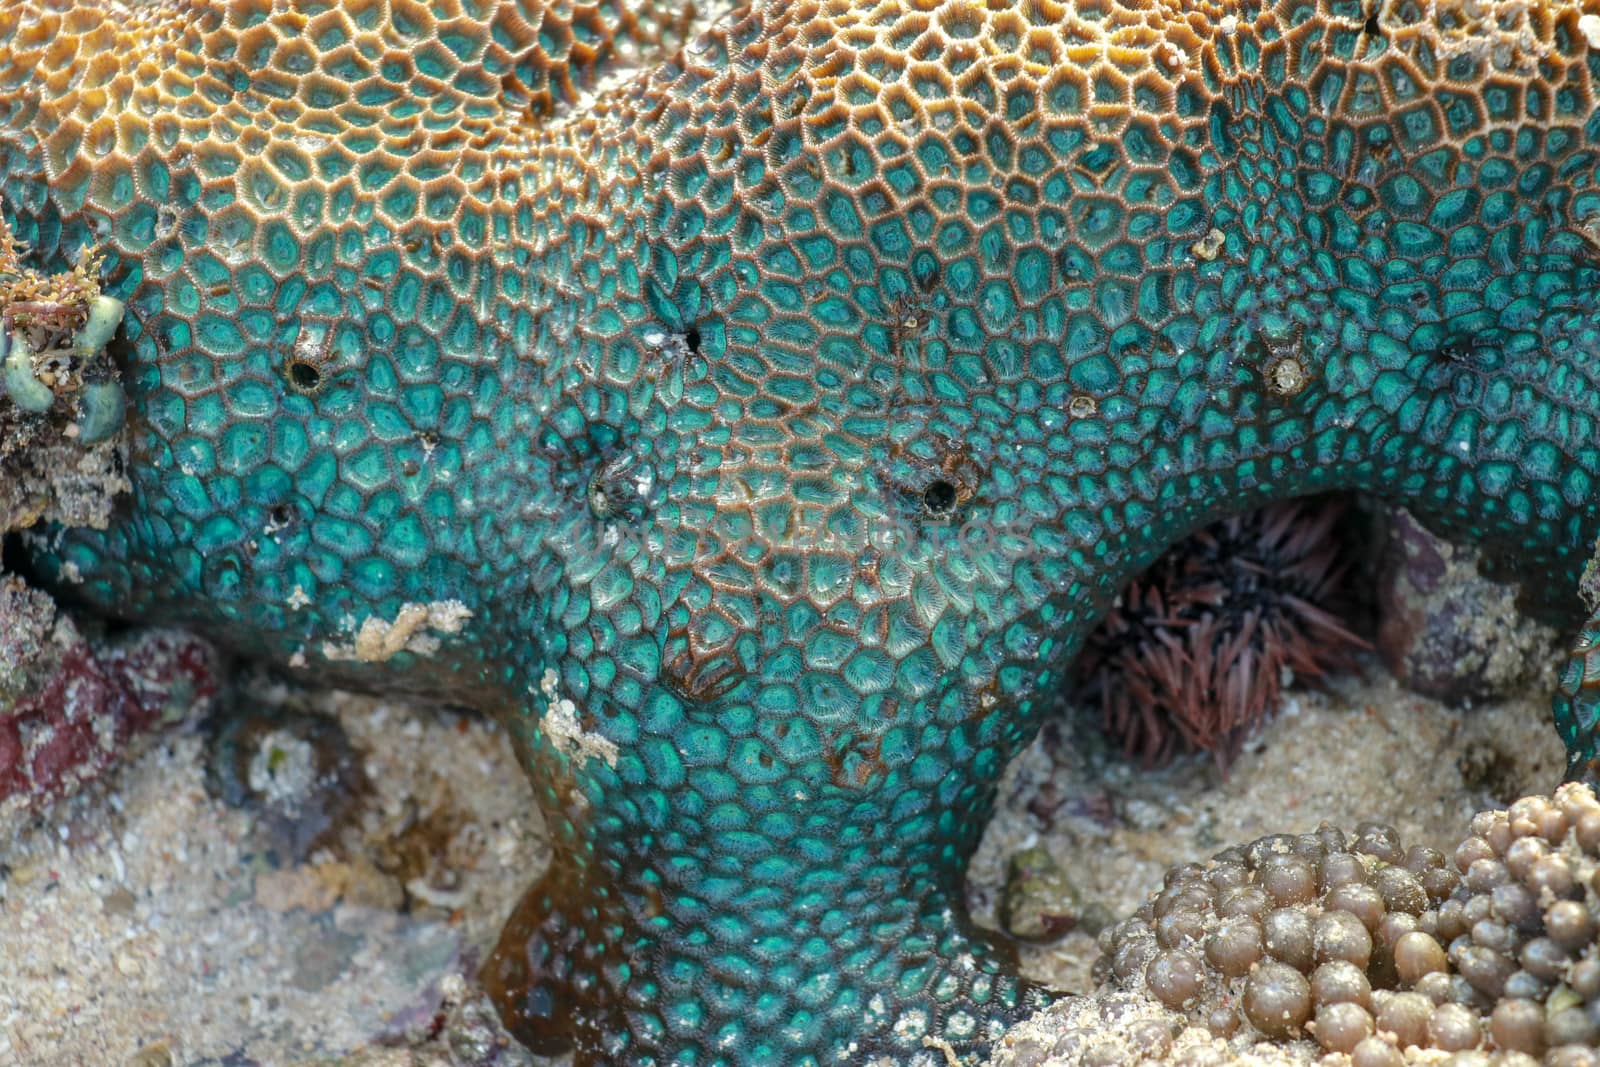 This is a turquoise favia coral with bright blue eyes during low tide by Sanatana2008